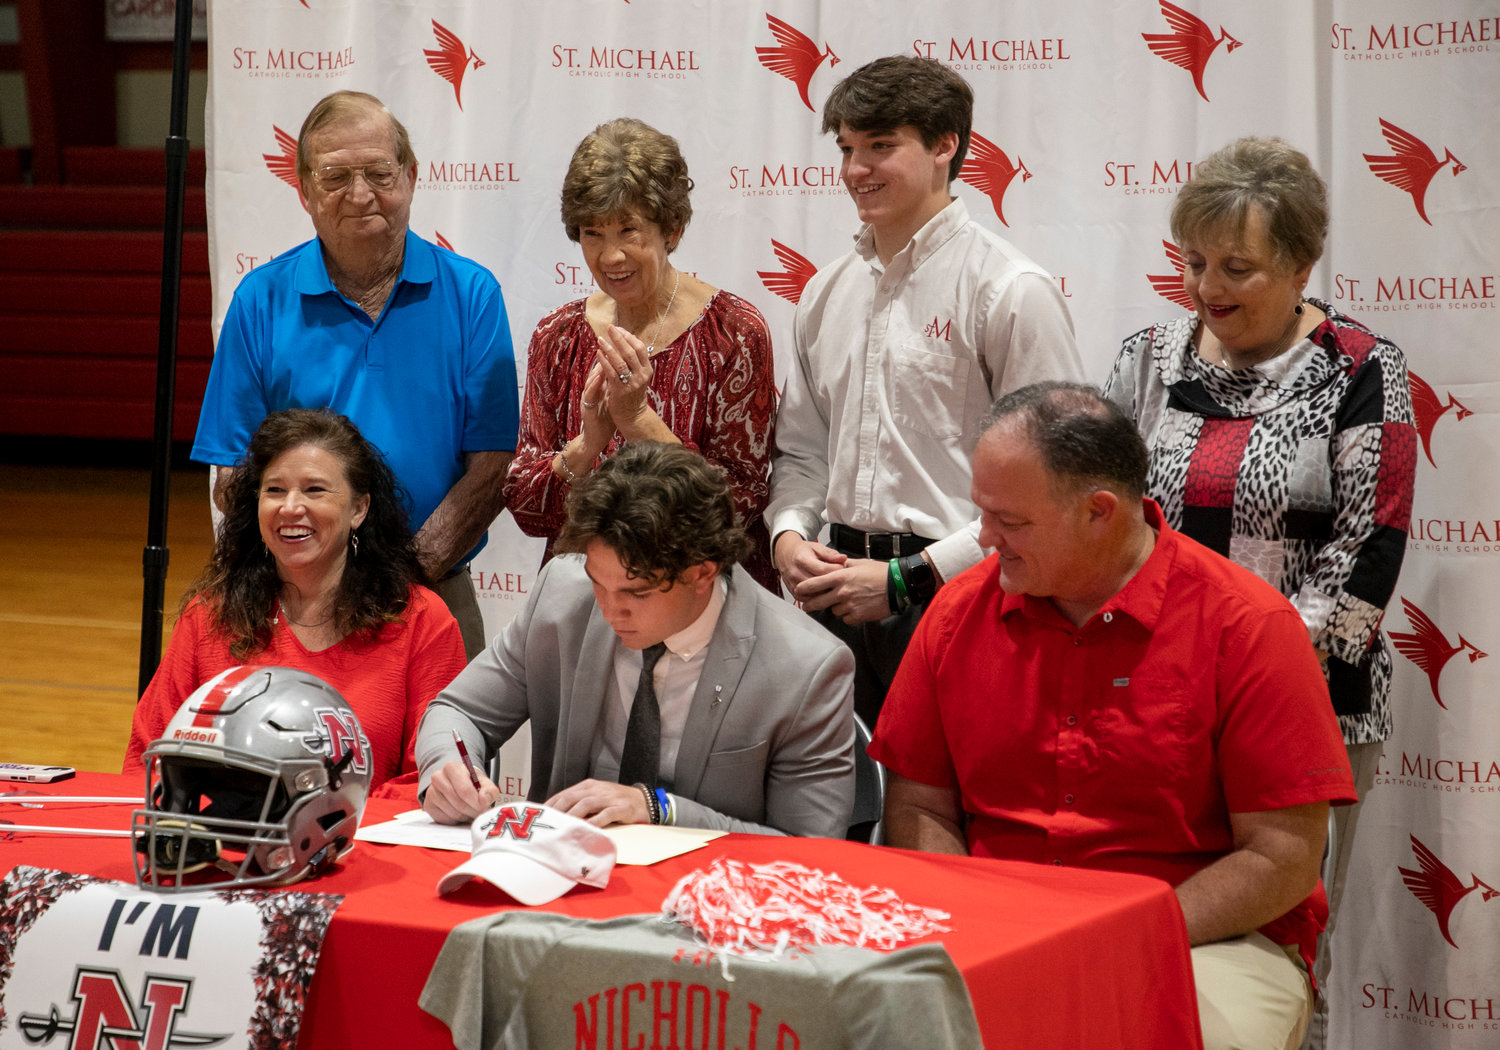 St. Michael senior Justin Helper was joined by his family in celebrating his signing with the Nicholls State football program Monday, March 27, at the high school. Helper finished his senior season with 50 tackles, 14 pass breakups, 3 forced fumbles and 2 blocked field goals.